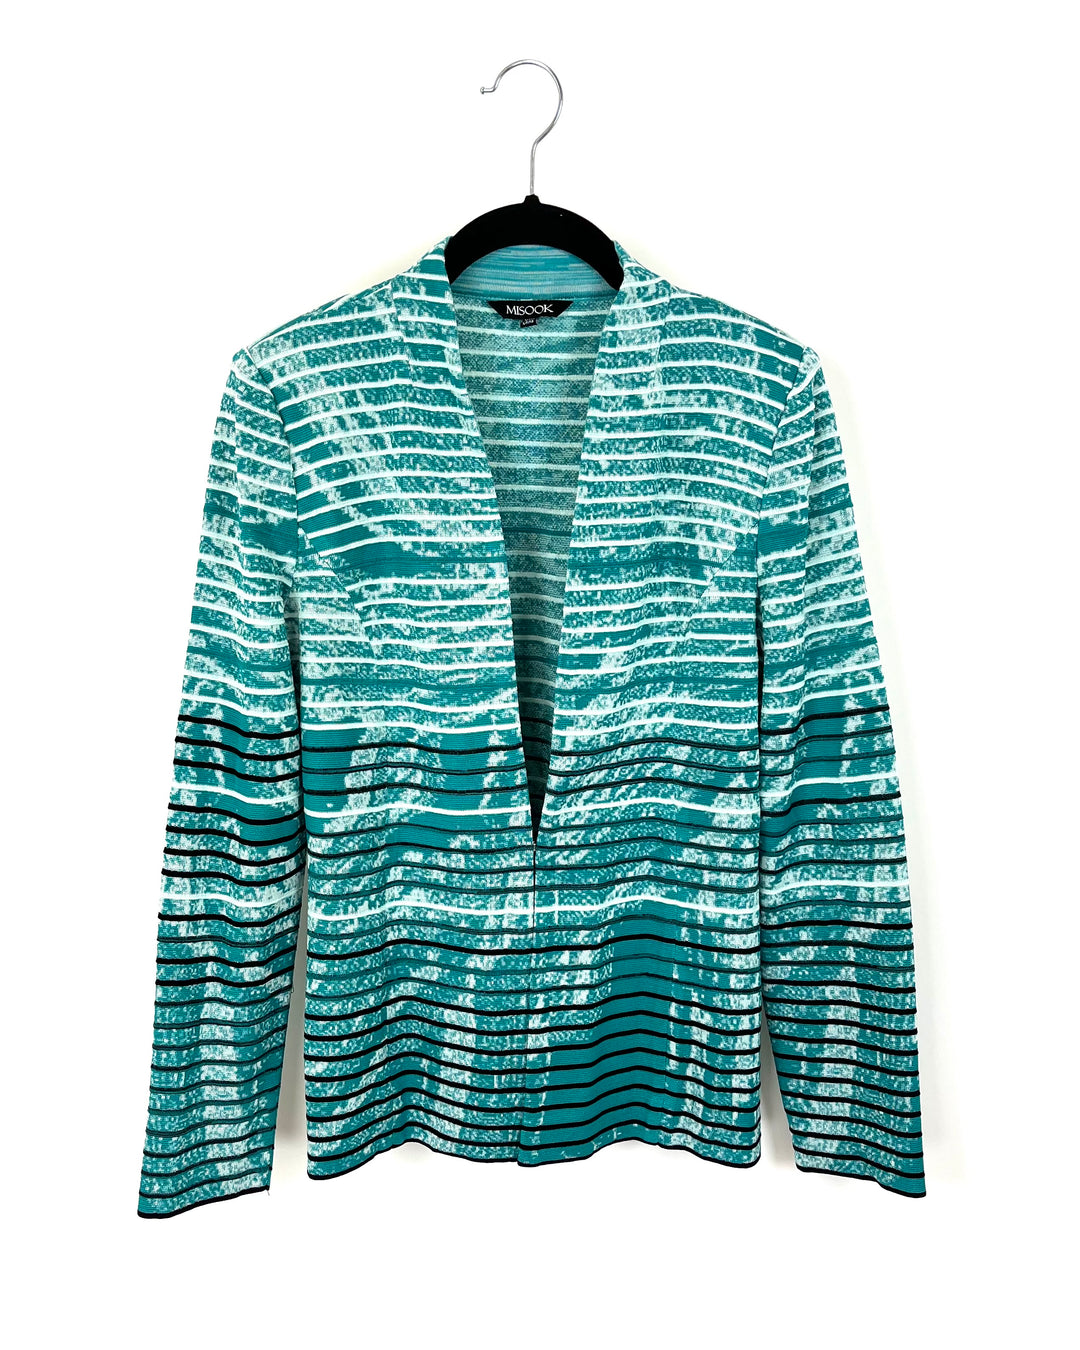 Teal And White Cardigan - Size 0